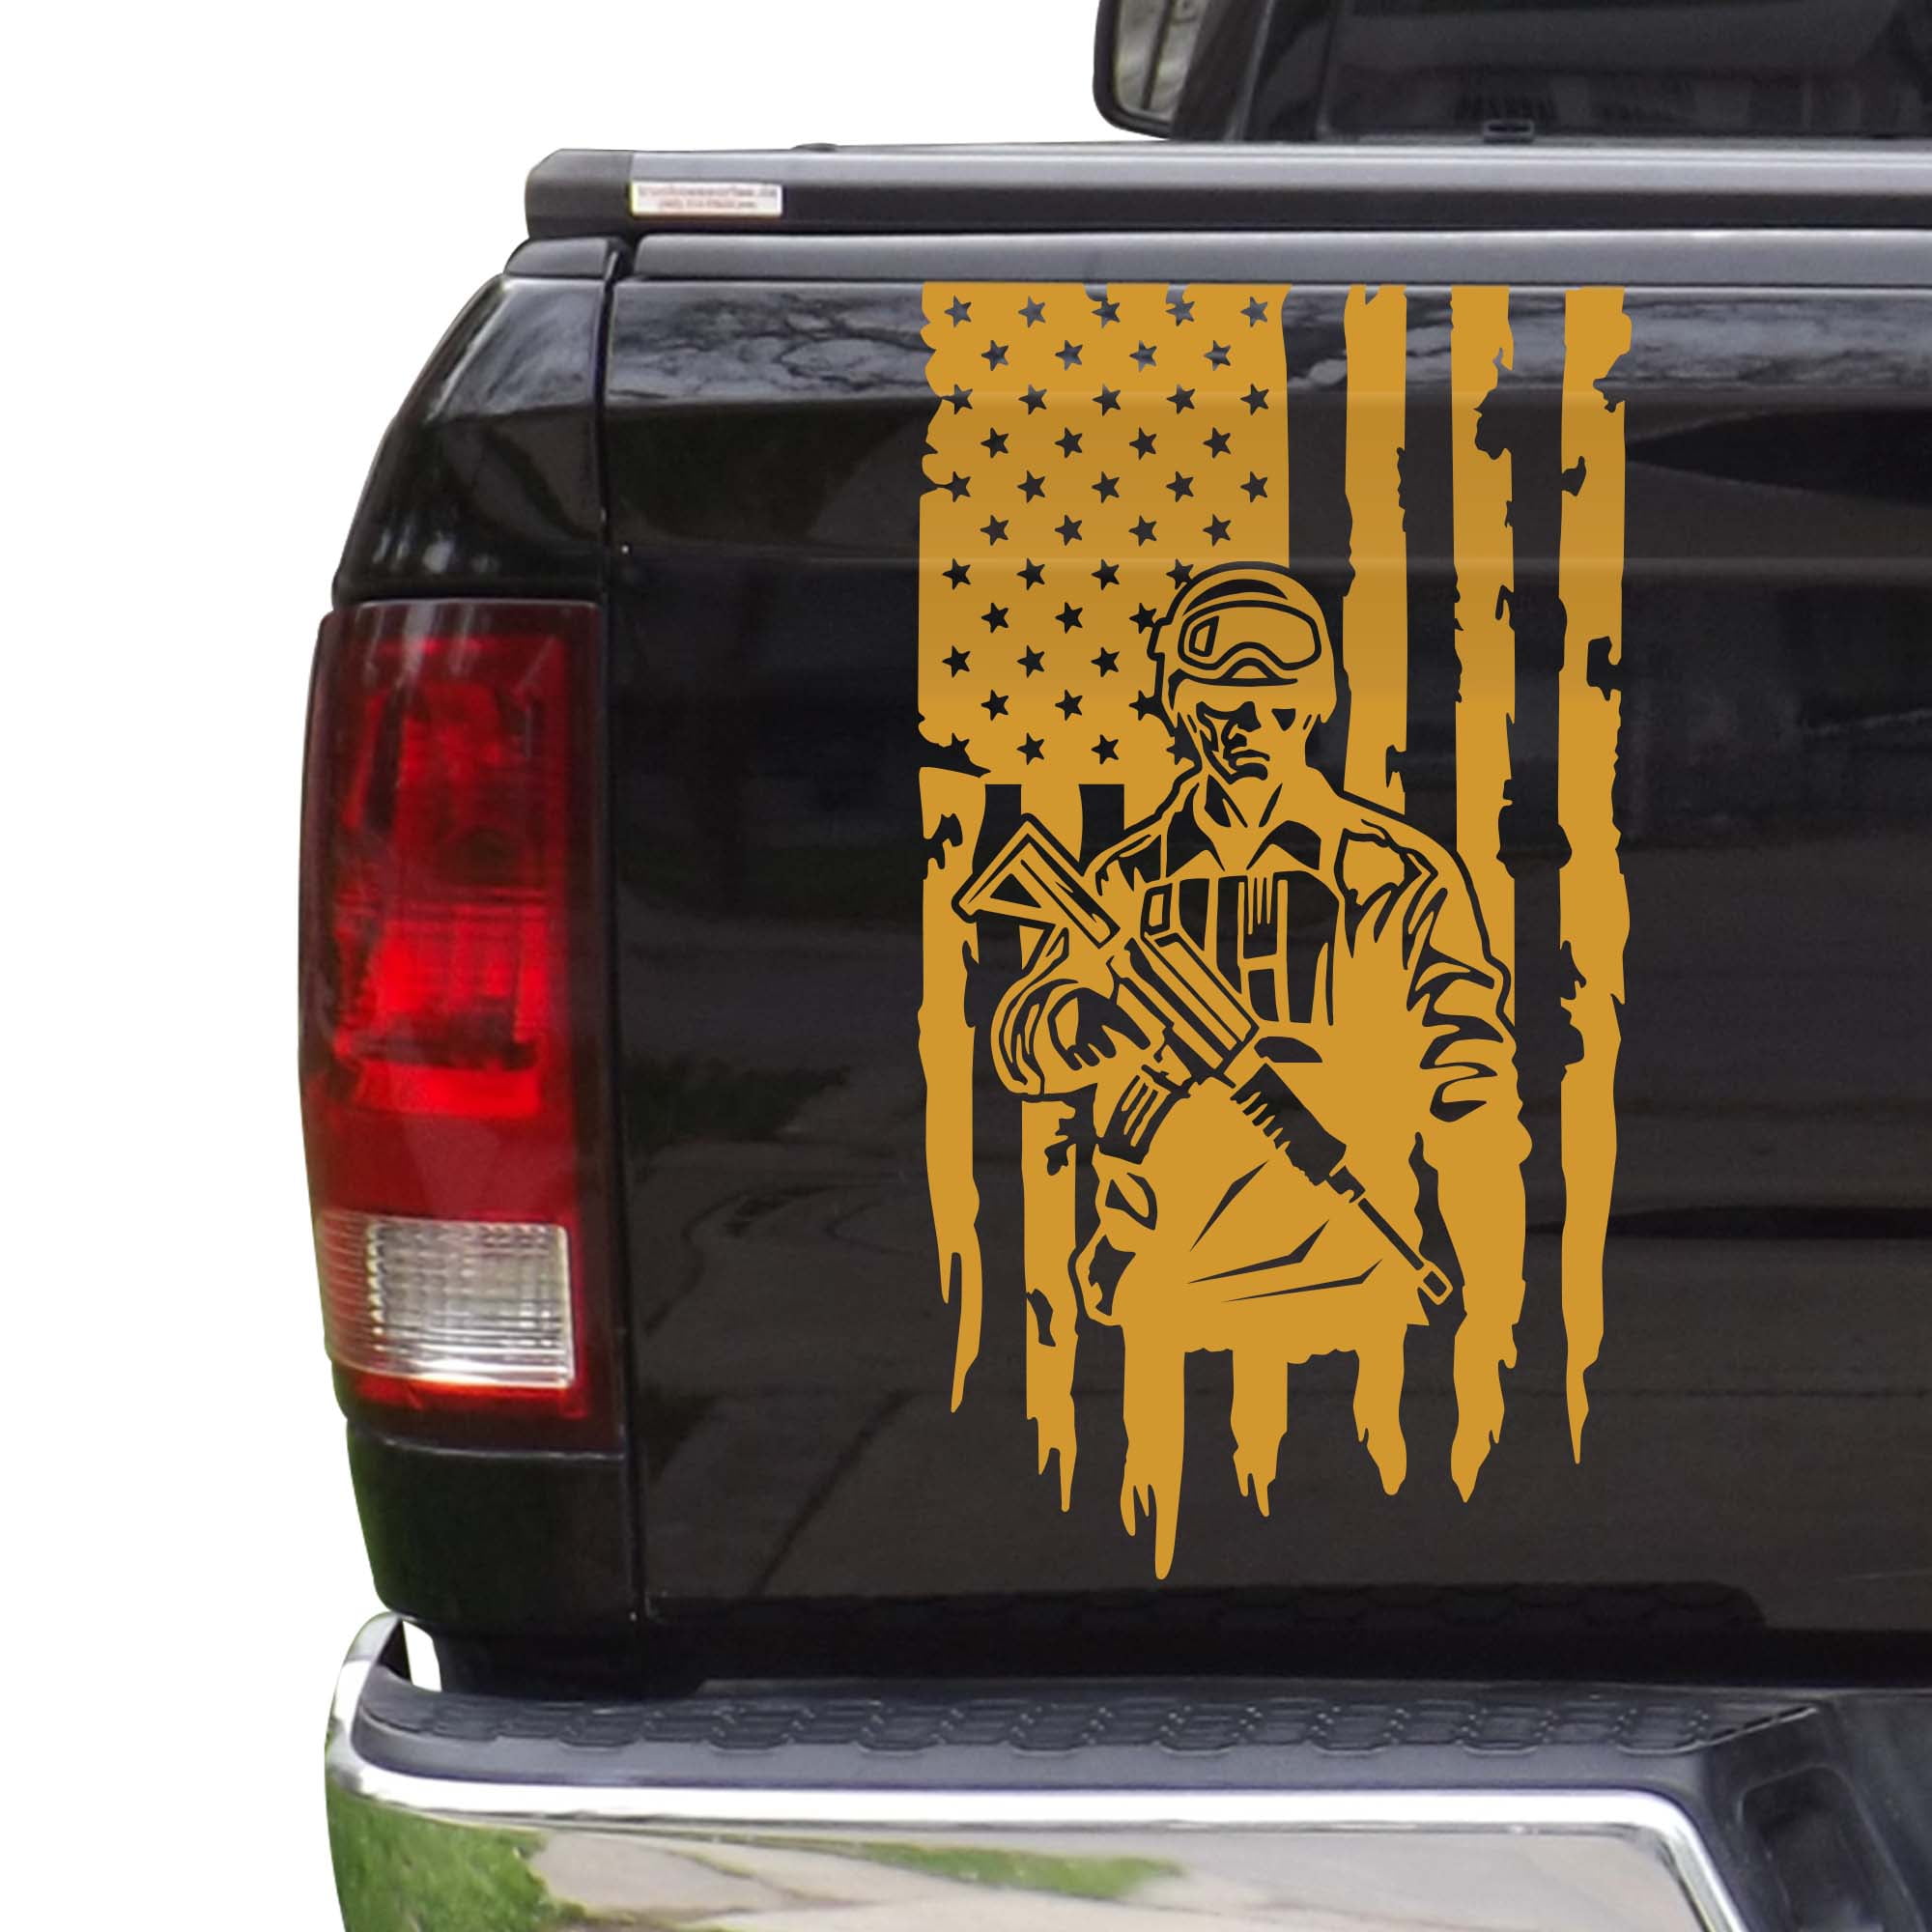 Enlisted Man Car Decal Soldier Window Or Bumper Sticker